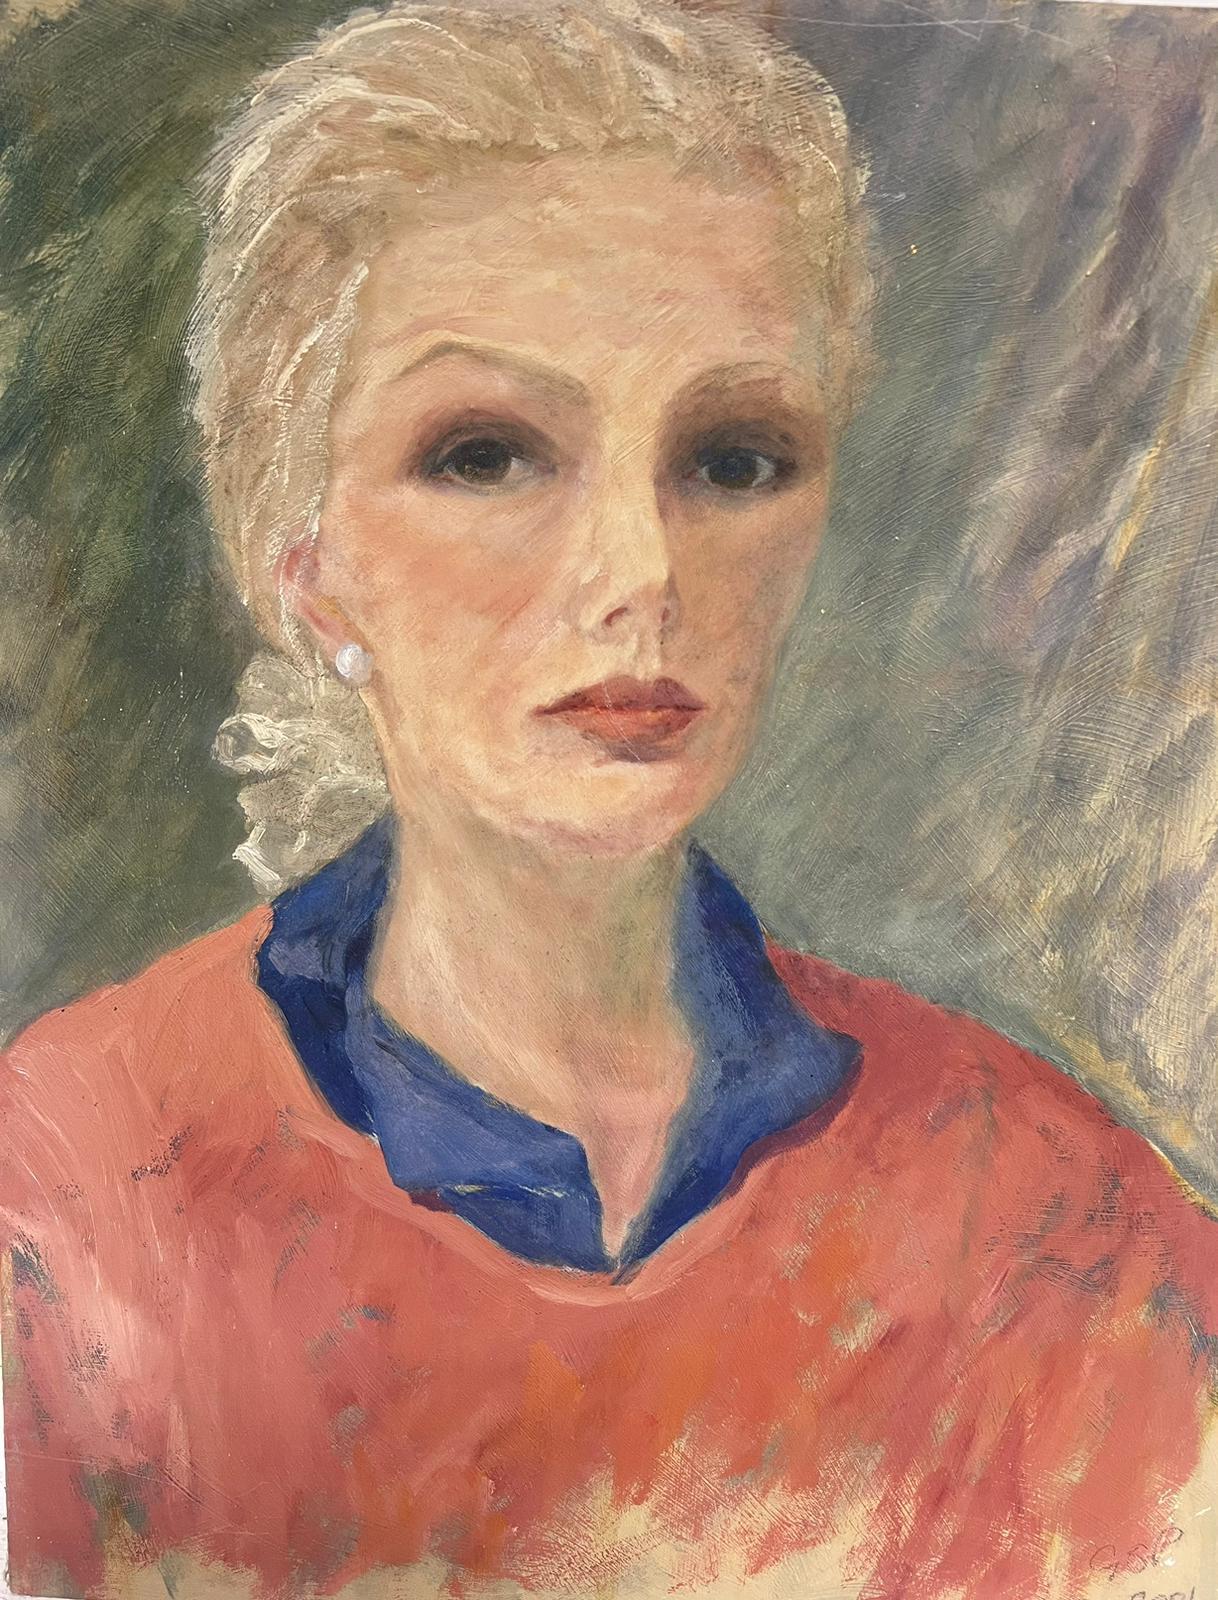 Contemporary British Modernist Oil Painting Portrait of Woman in Pink